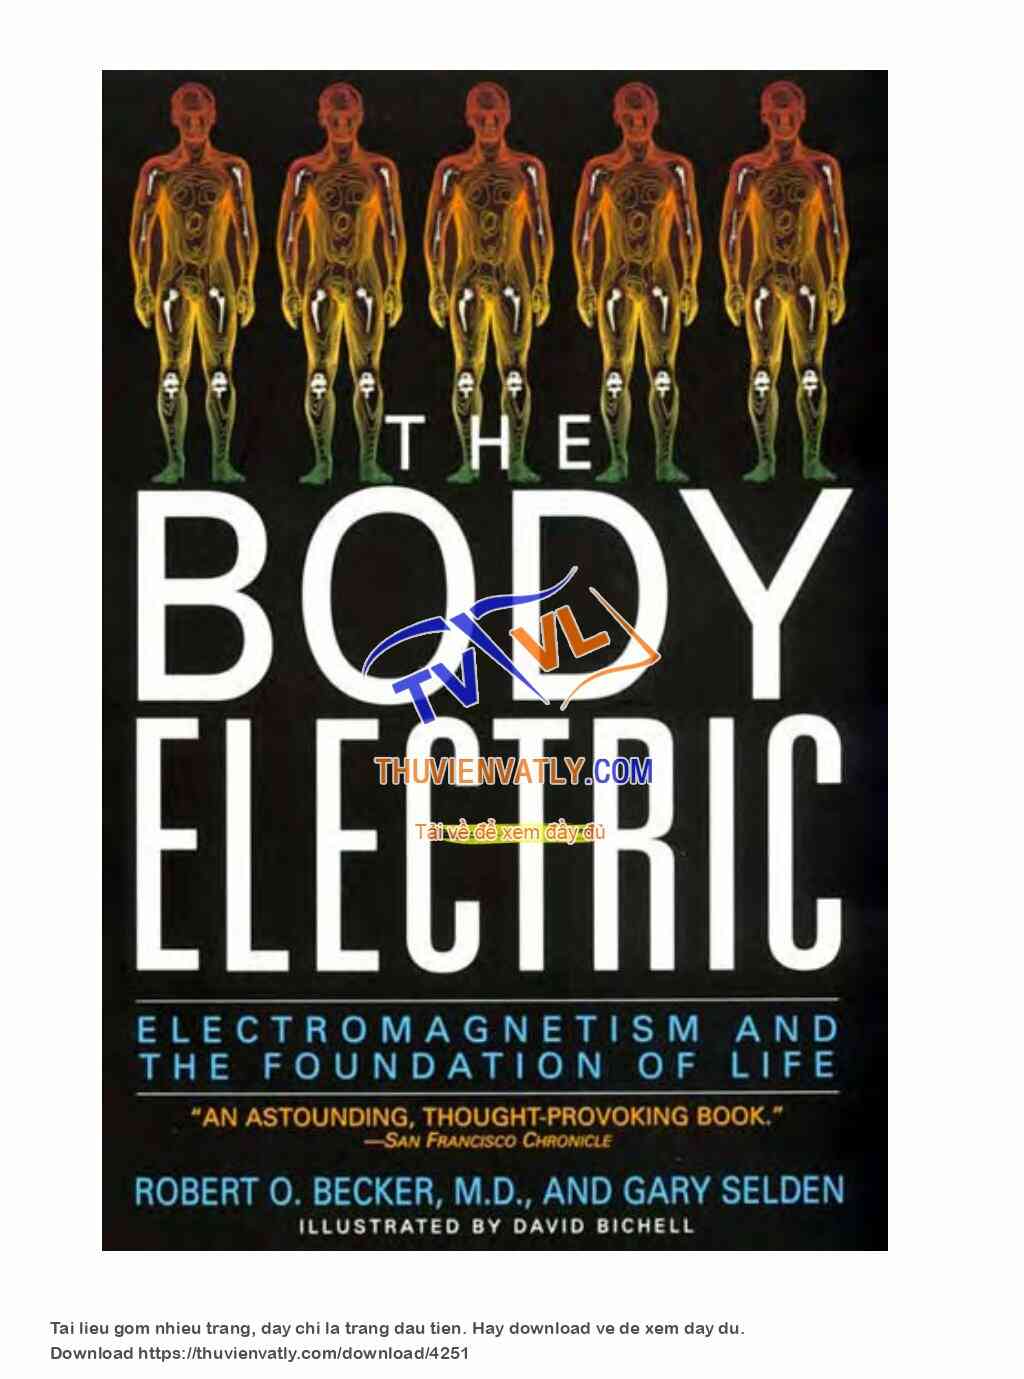 Electromagnetism And The Foundation Of Life